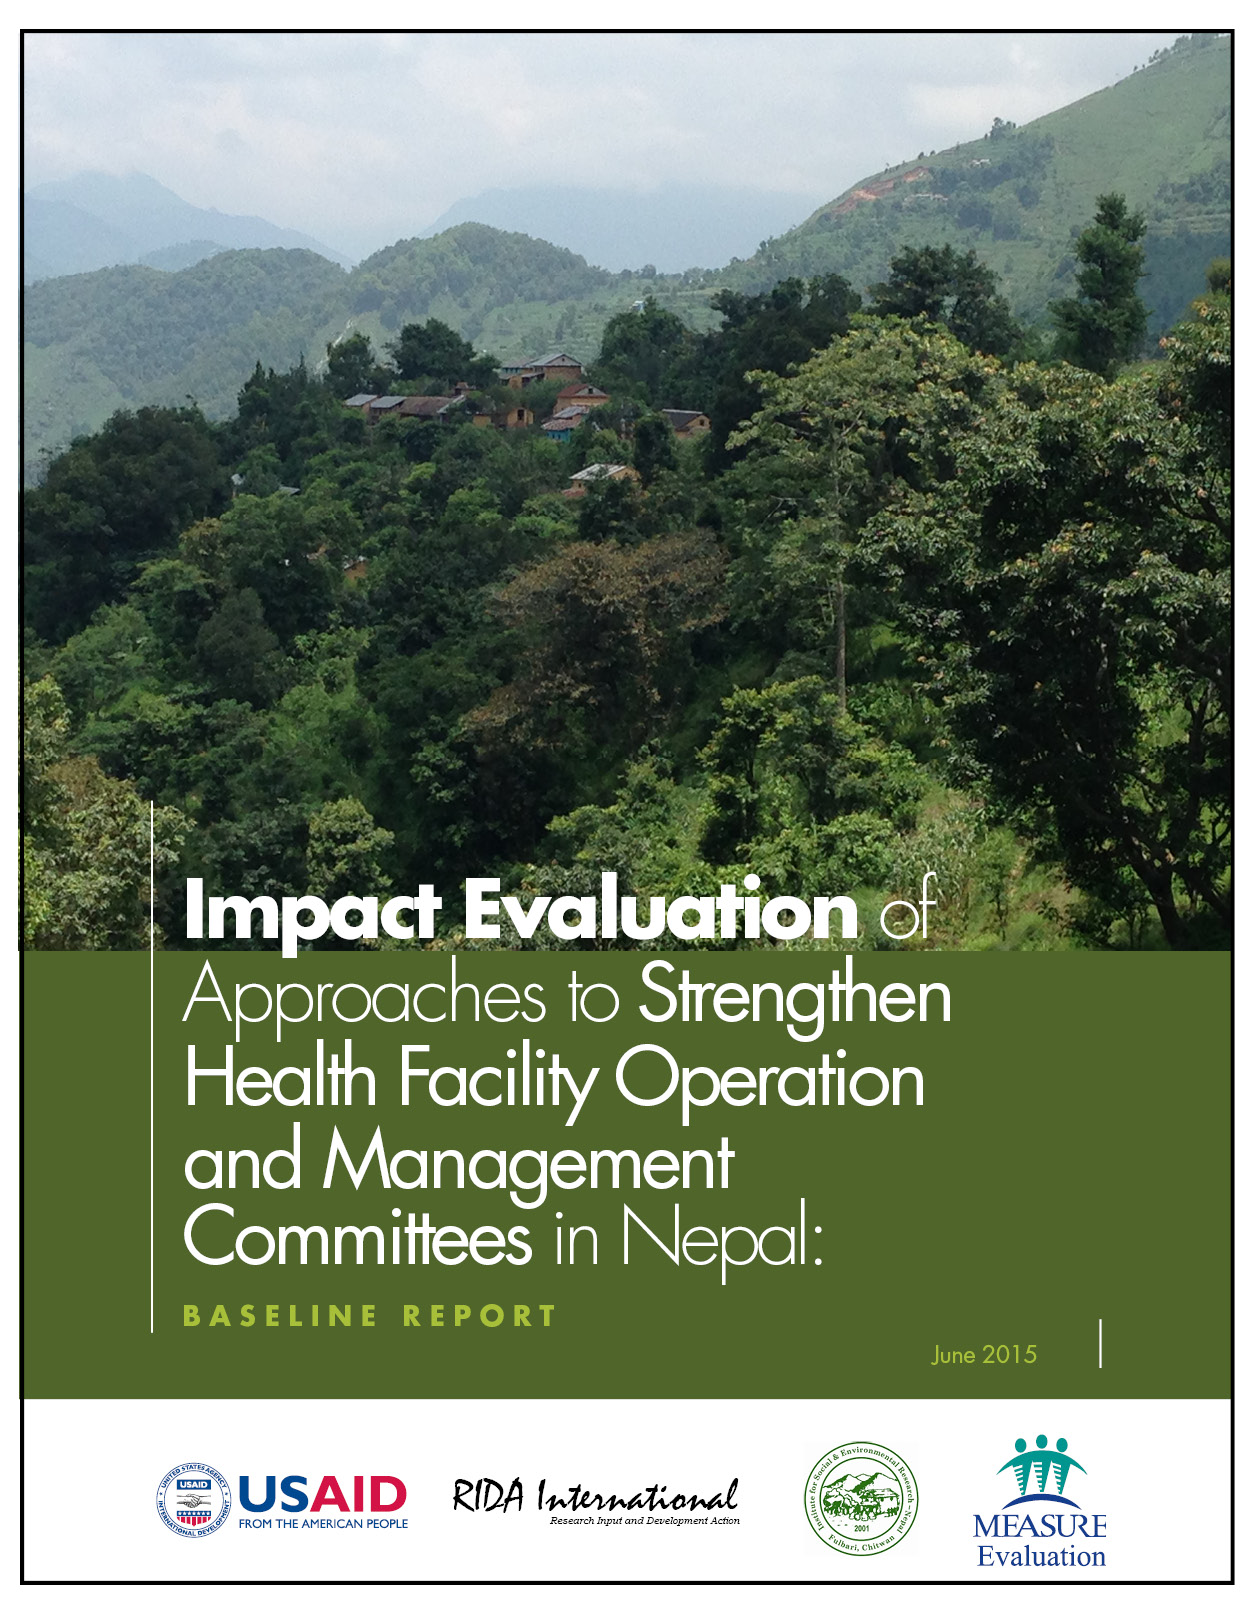 Impact Evaluation of Approaches to Strengthen Health Facility Operation and Management Committees in Nepal: Baseline Report